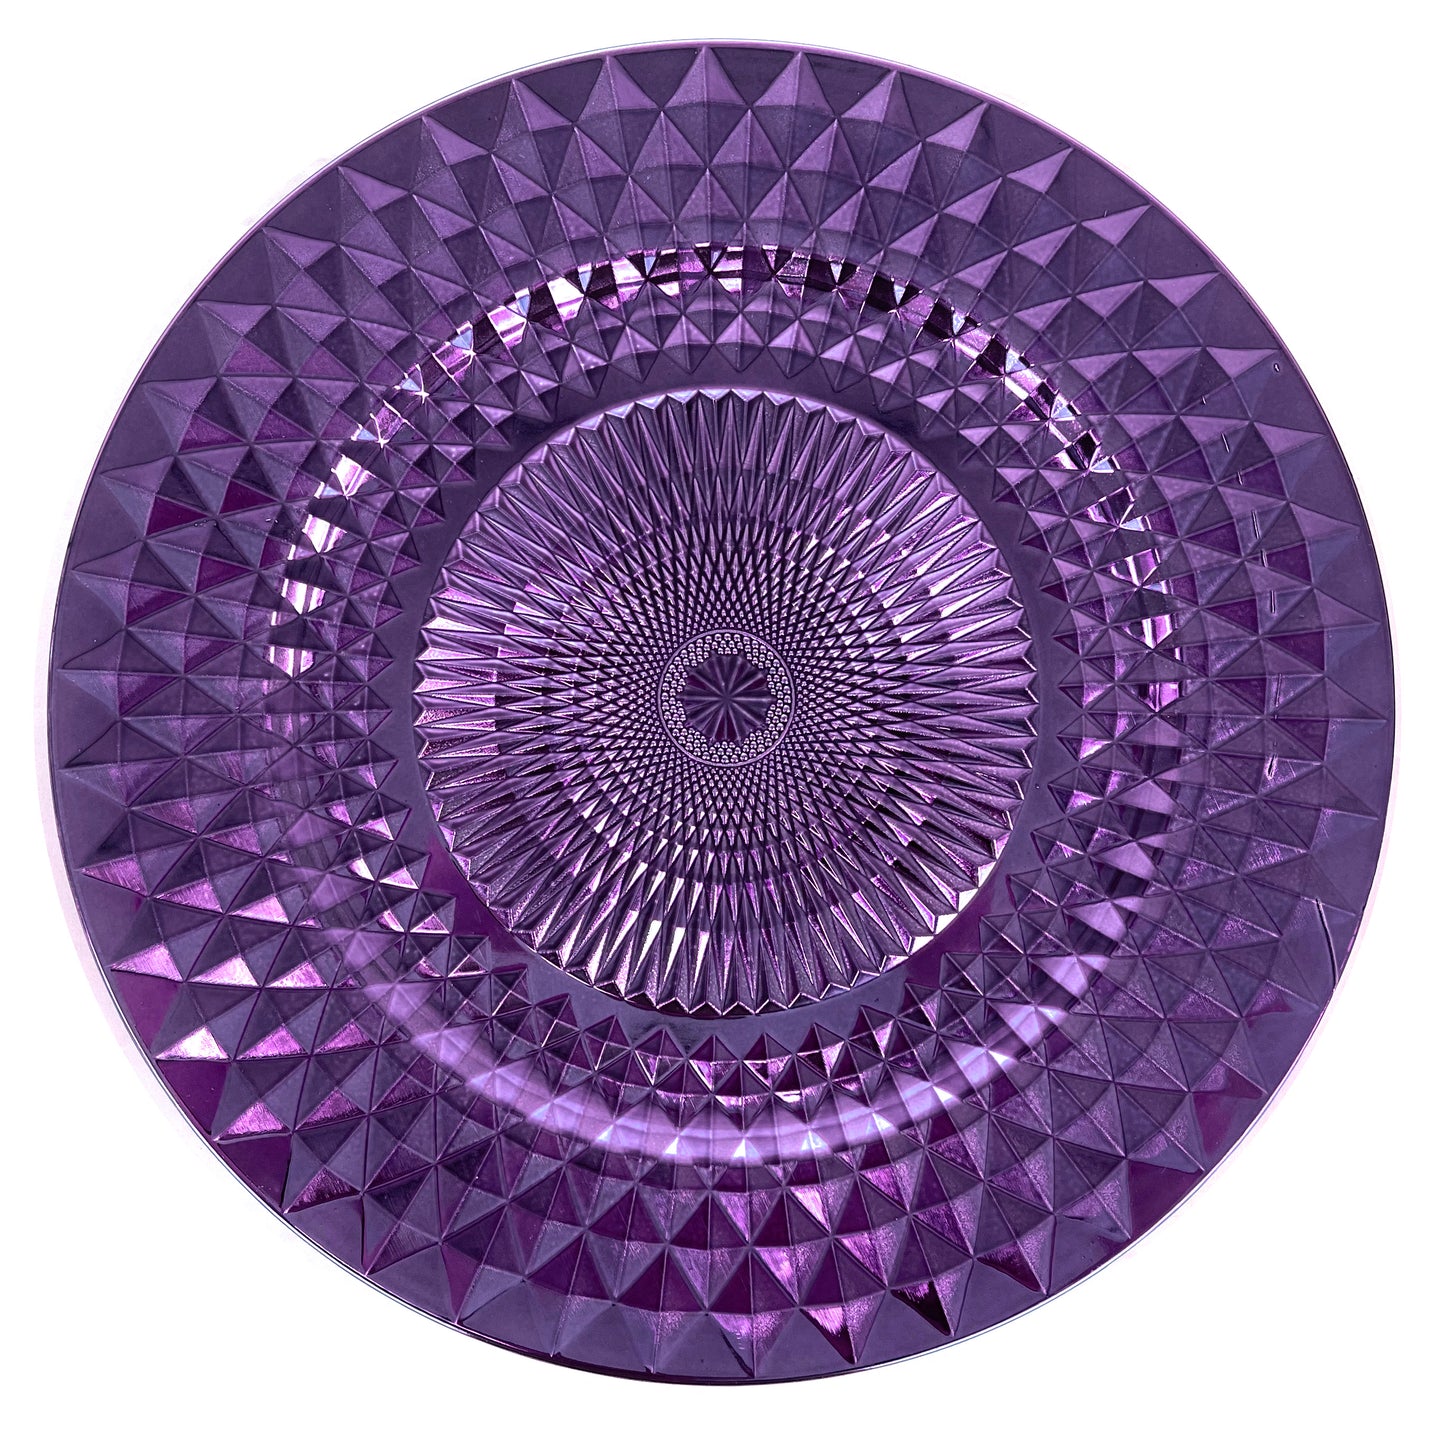 Allgala Charger Plates 13-Inch 6-Pack Plastic Diamond Pattern Sparkling Round Charger Plates